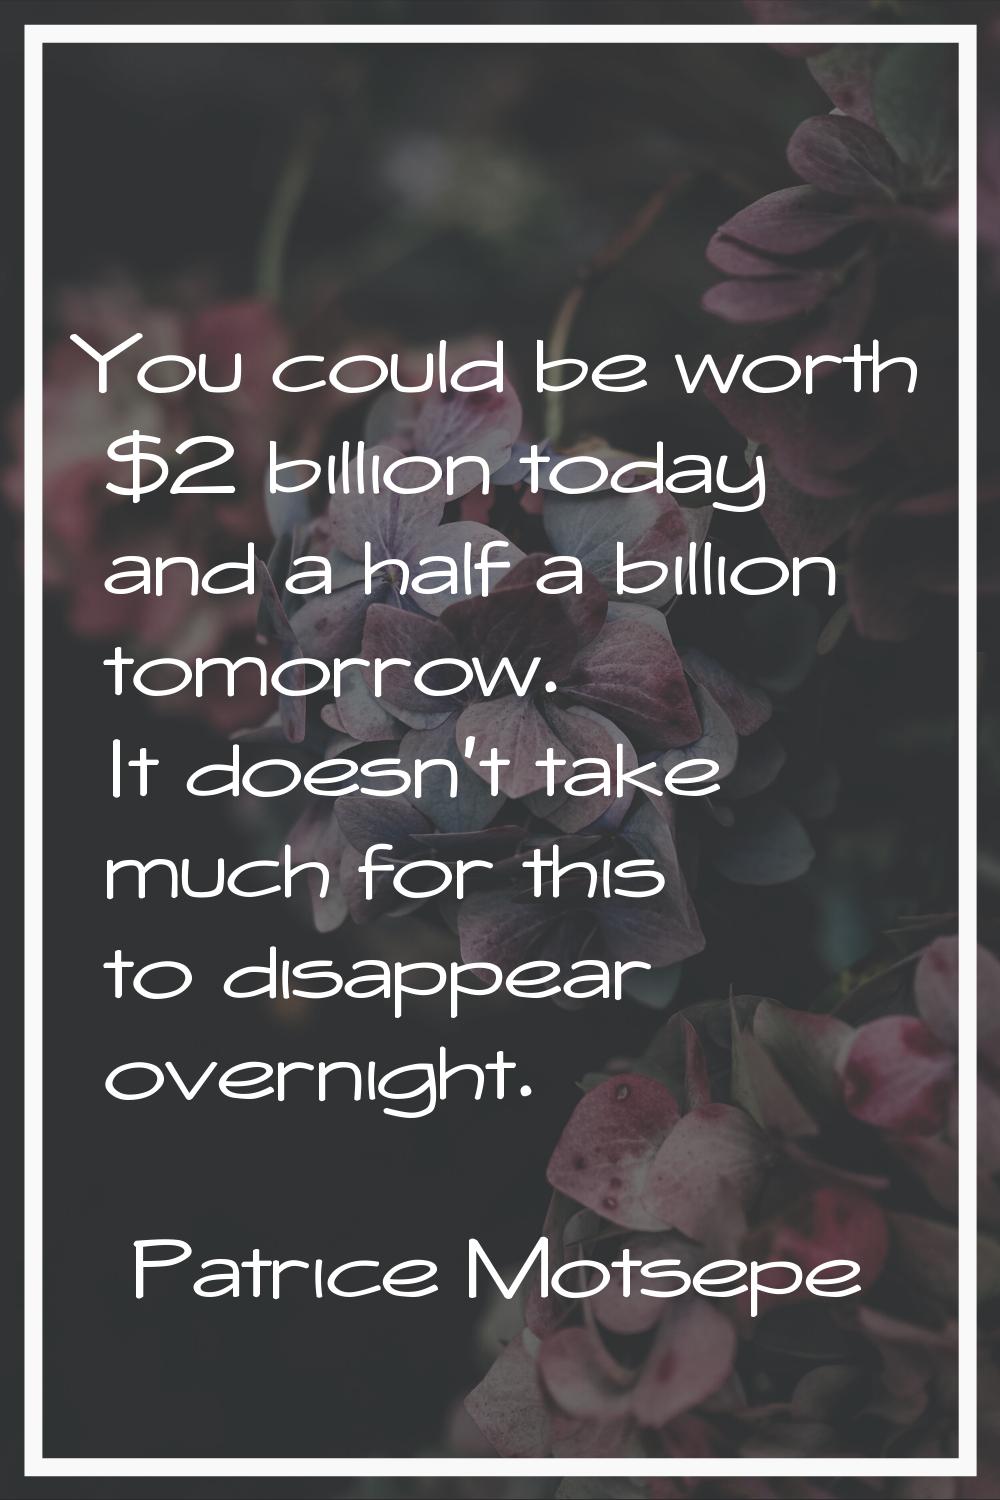 You could be worth $2 billion today and a half a billion tomorrow. It doesn't take much for this to